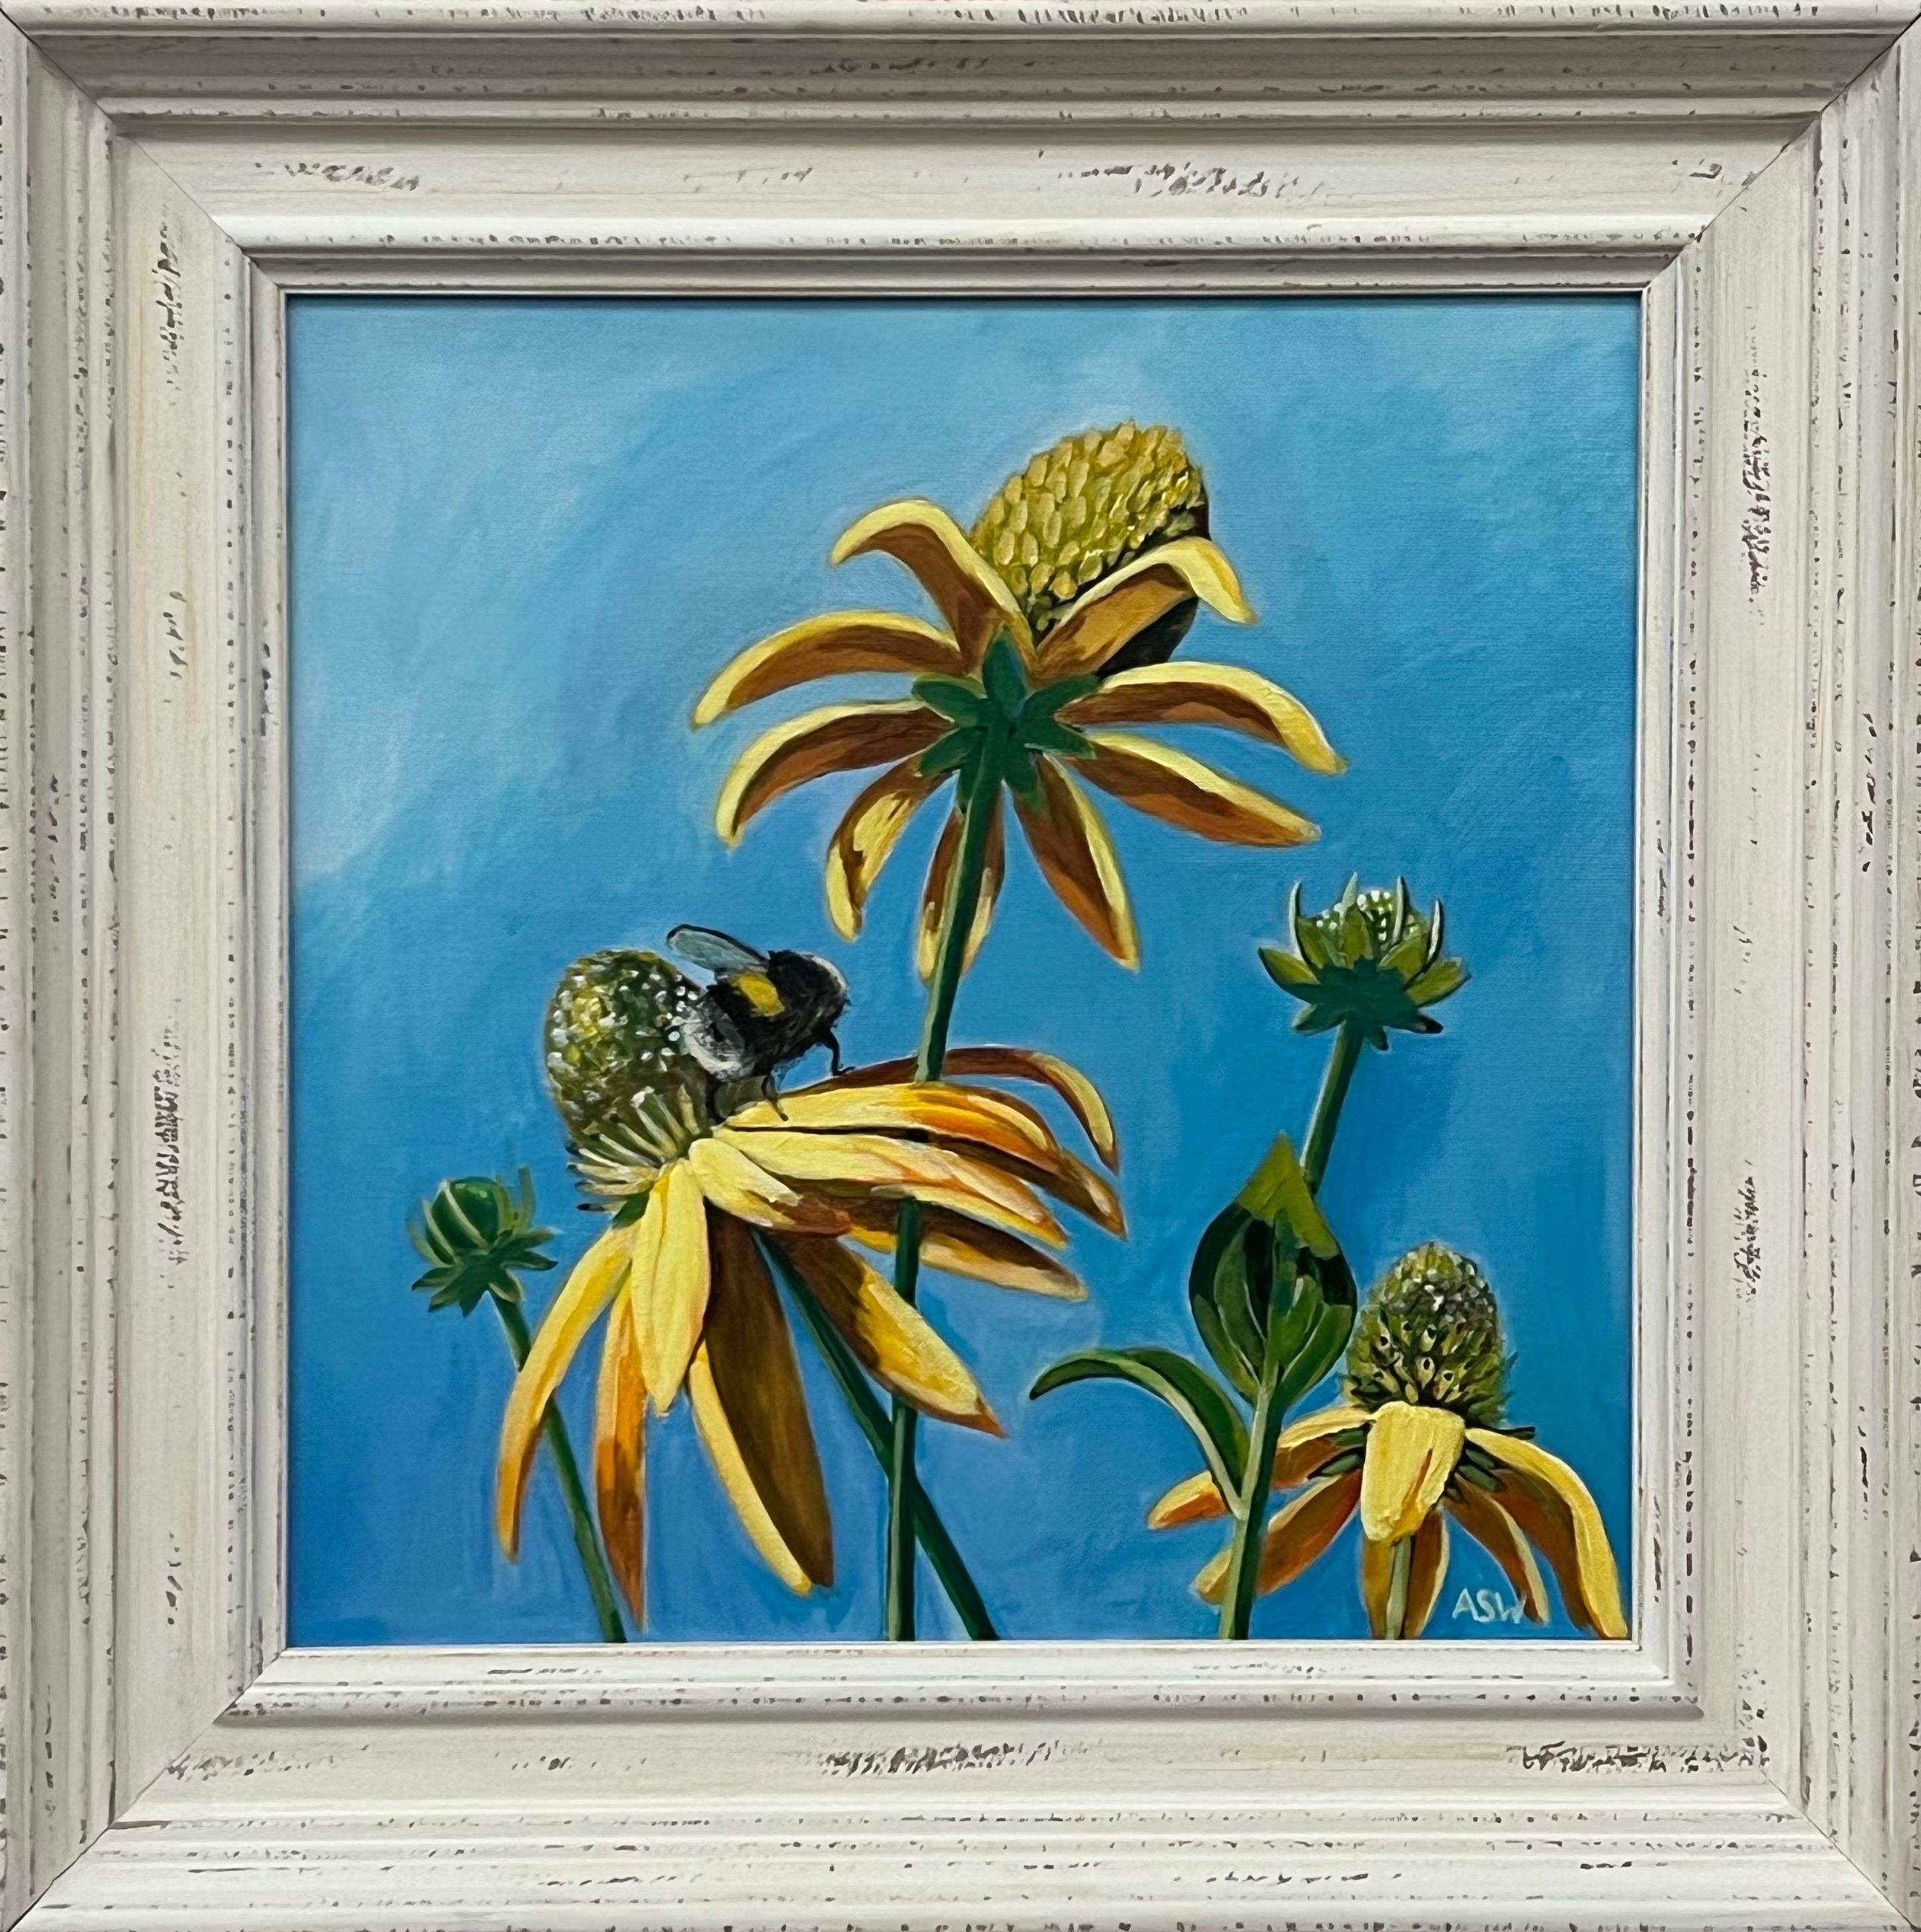 Angela Wakefield Landscape Painting - English Country Garden Landscape Art with Bee on Flowers by Contemporary Artist